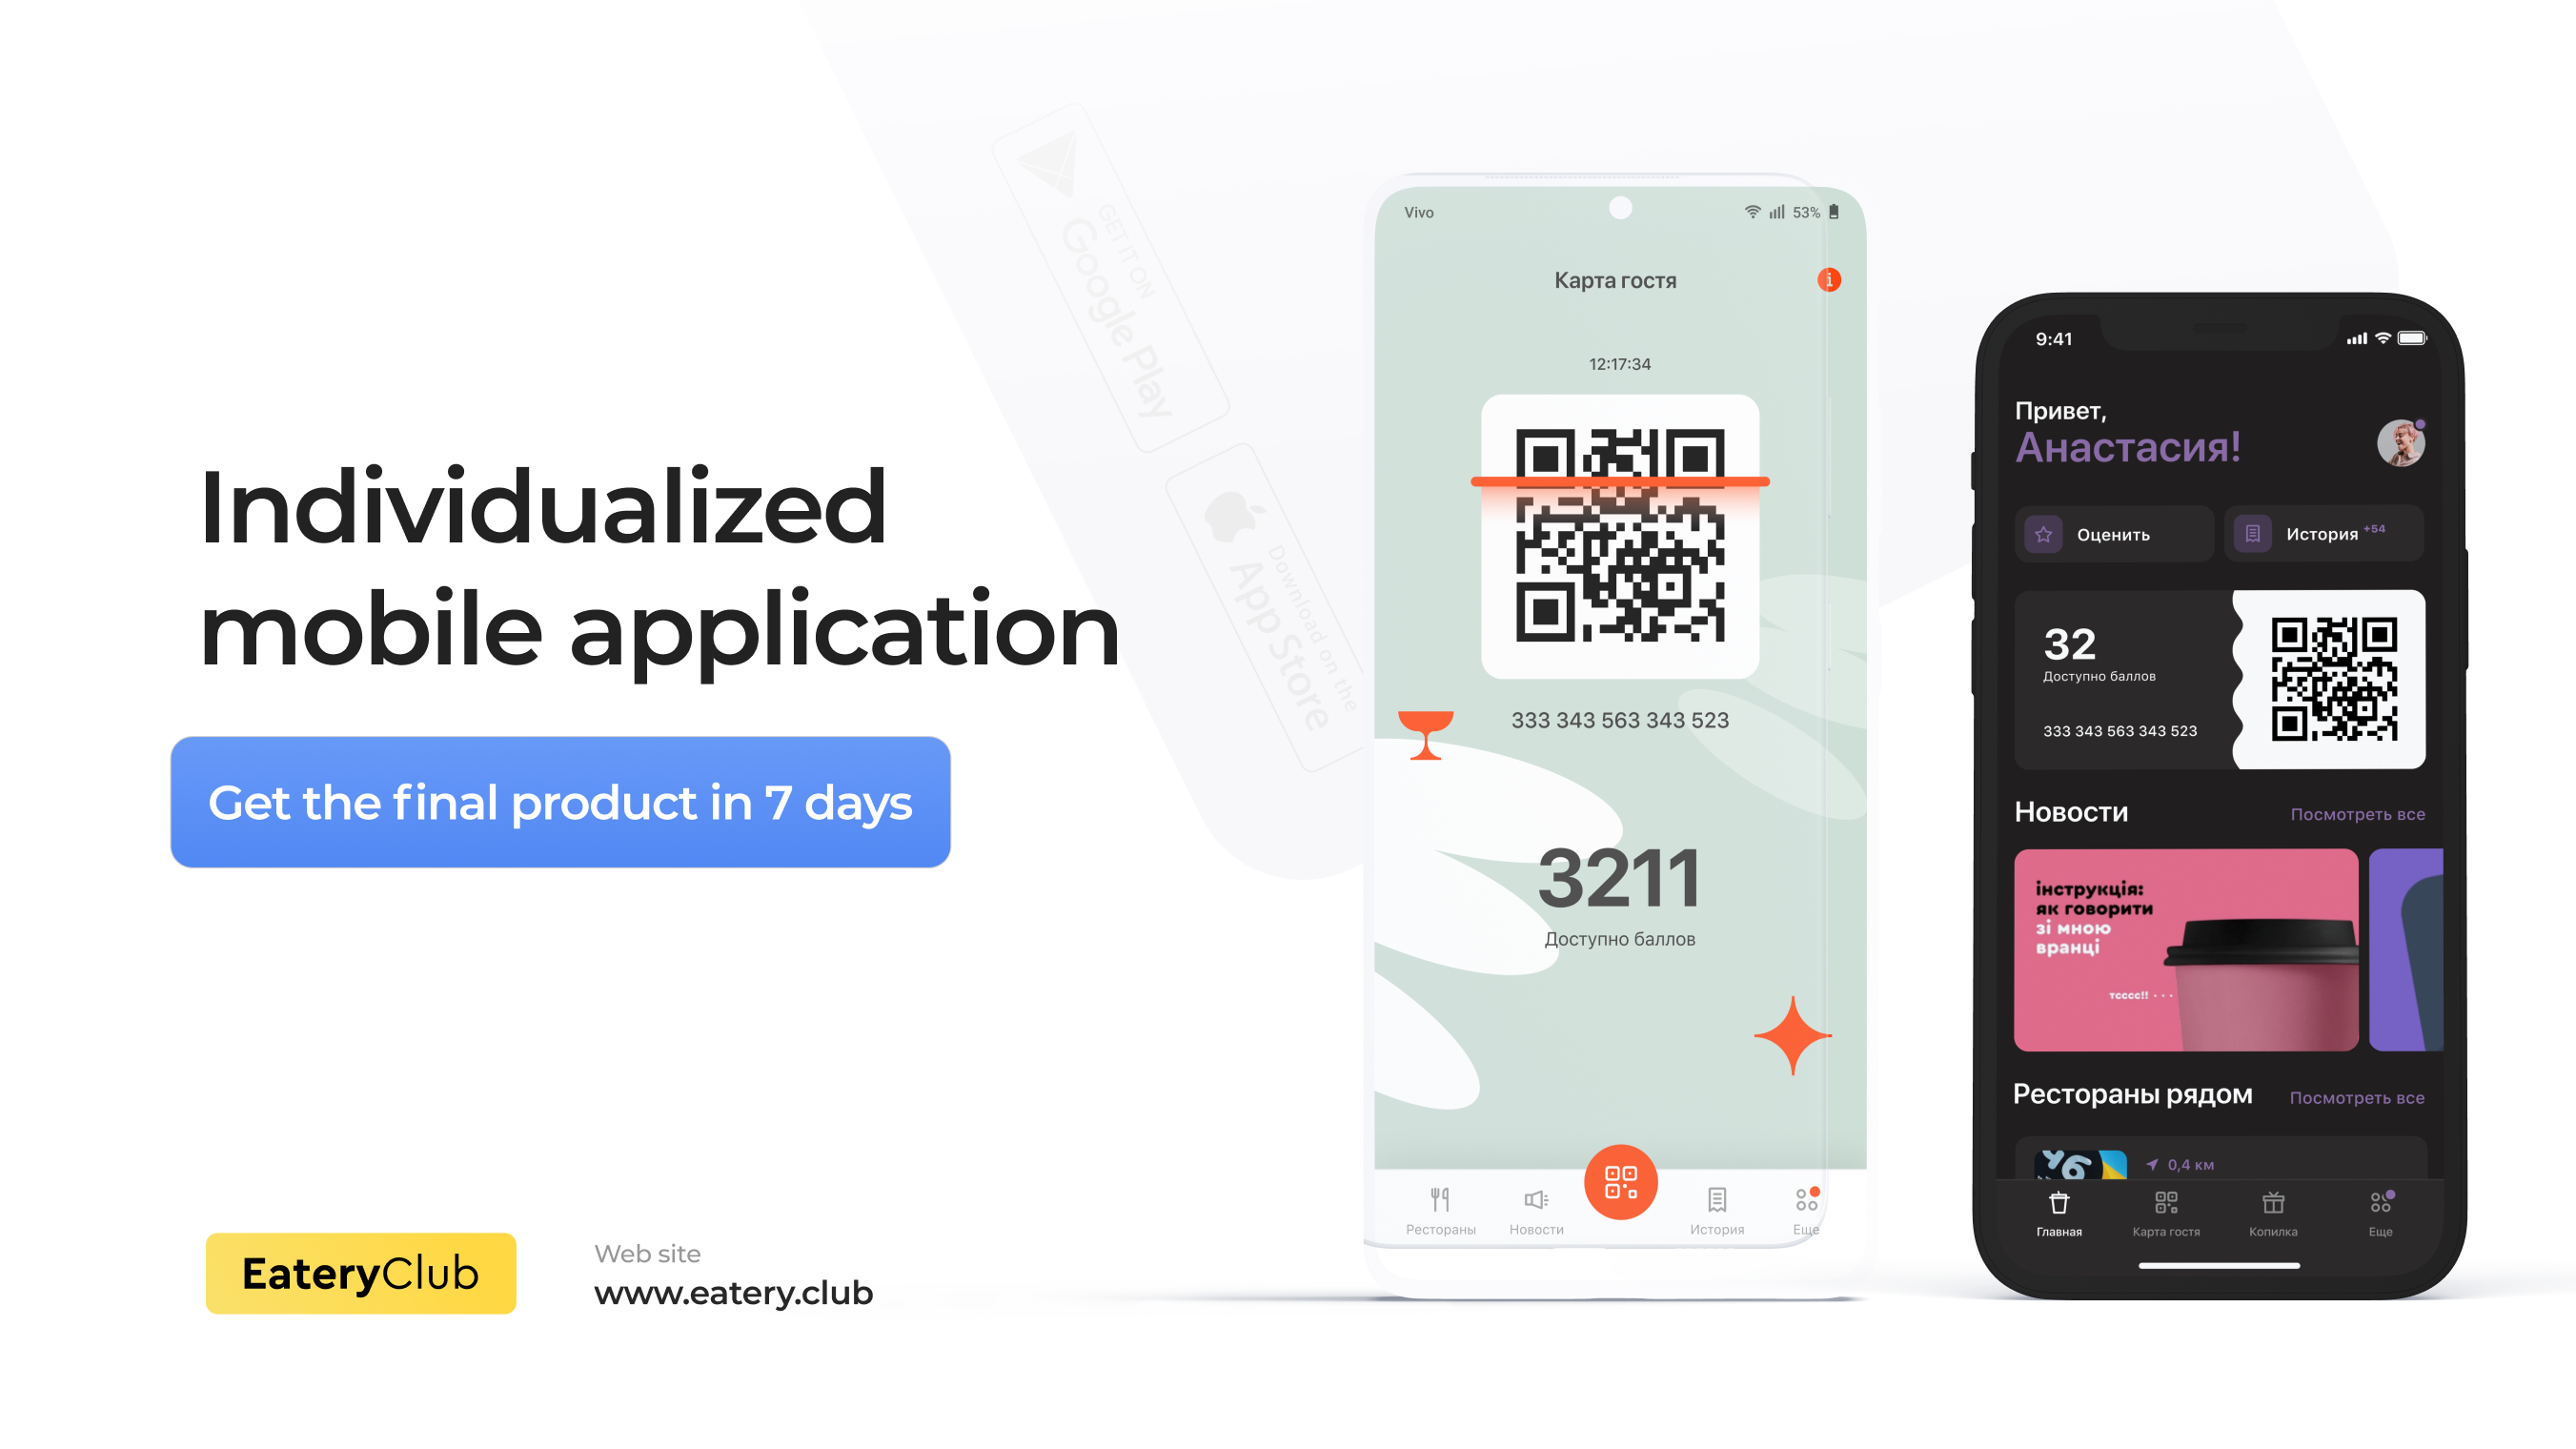 Personalized mobile application in 7 days